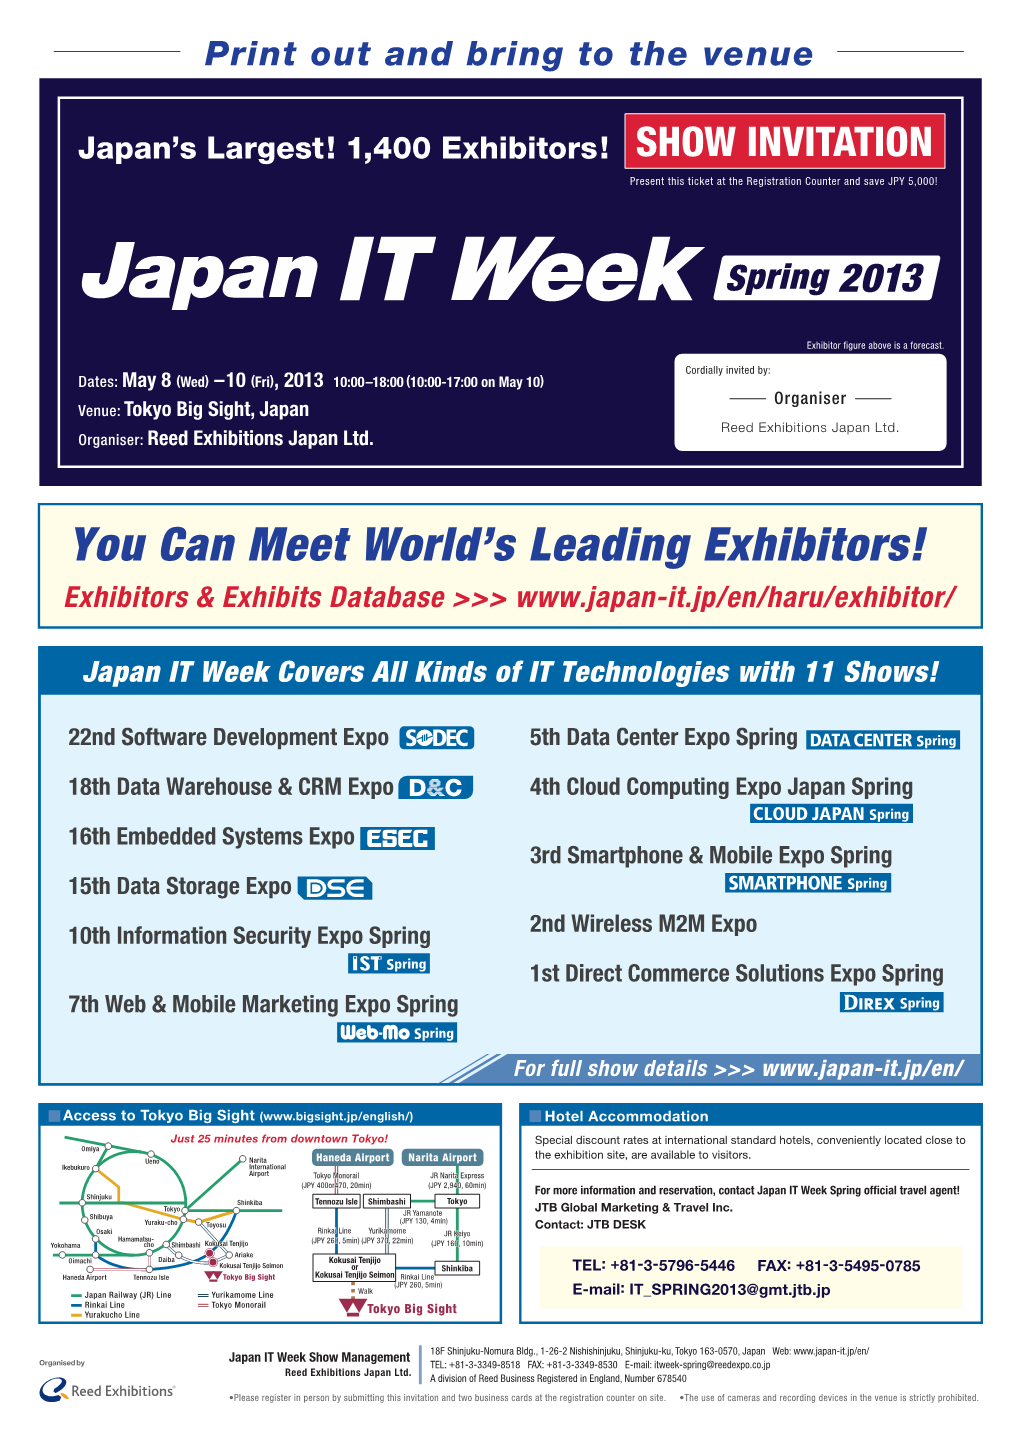 You Can Meet World's Leading Exhibitors!